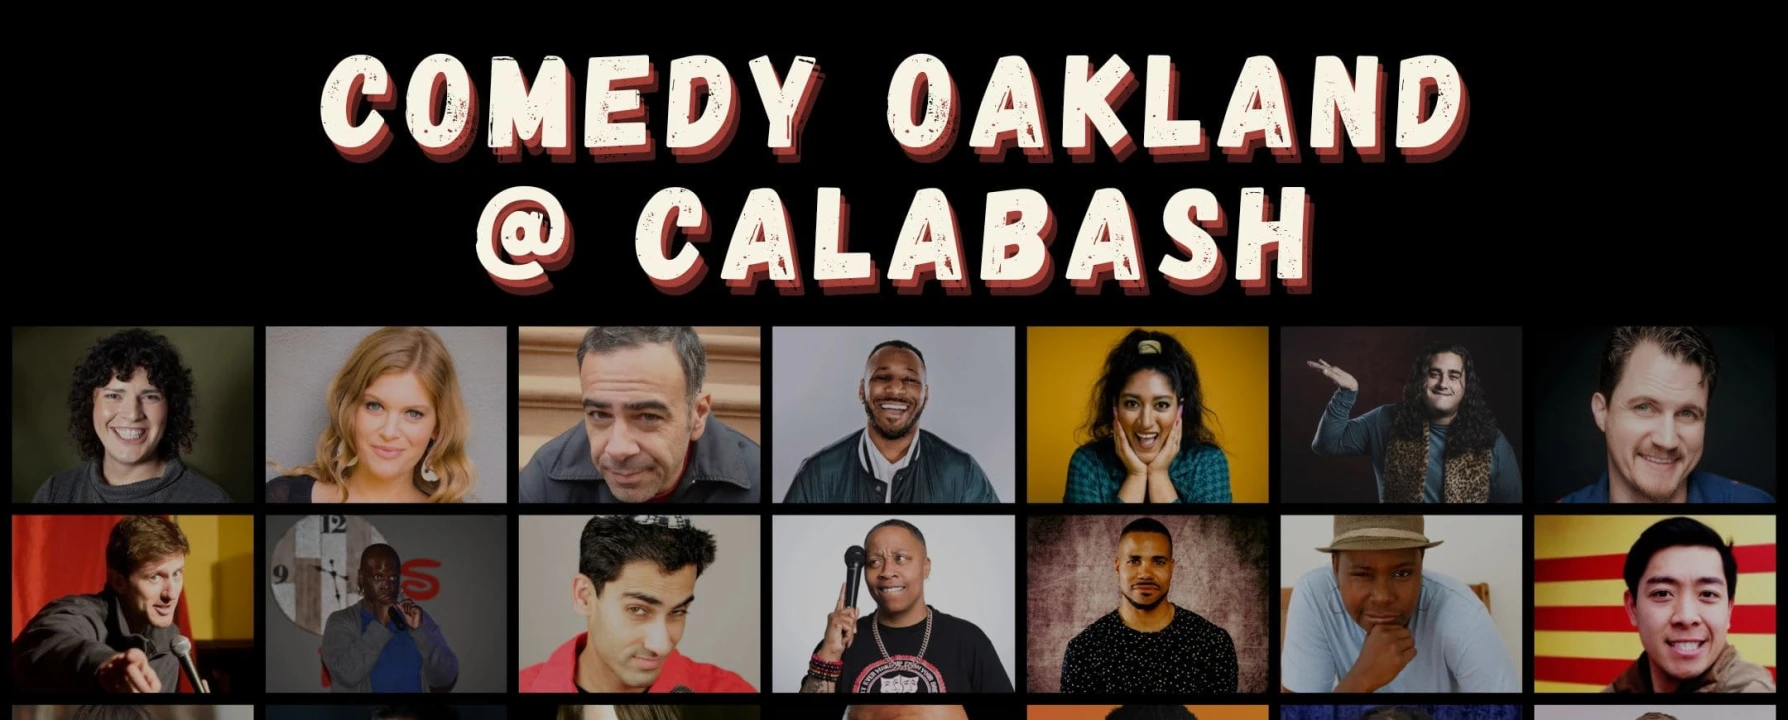 Comedy Oakland at Calabash: What to expect - 1